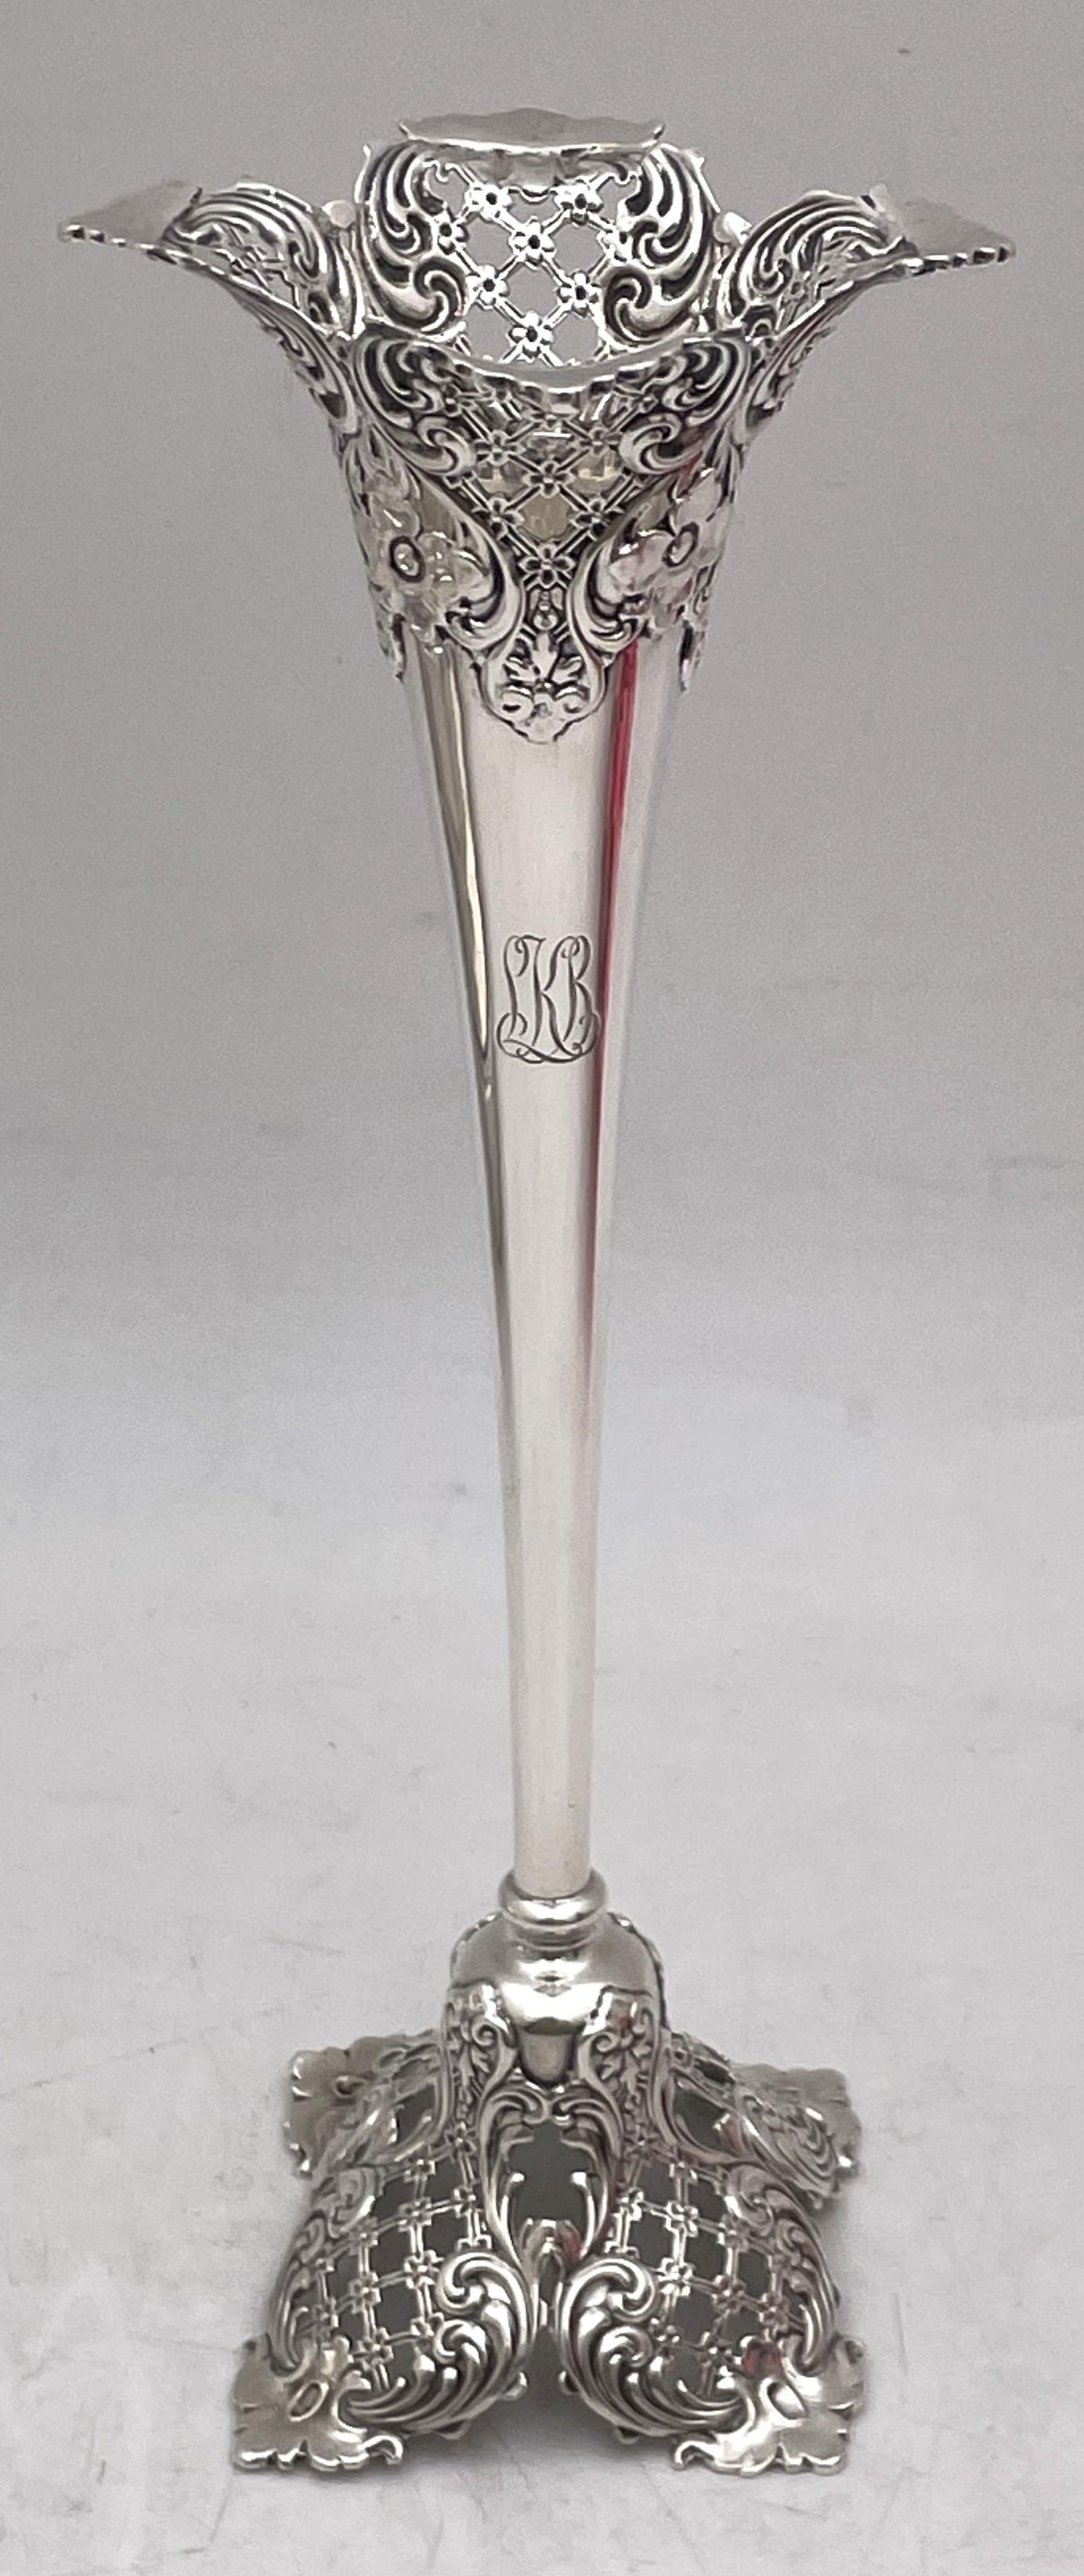  Mauser Sterling Silver Art Nouveau Bud Vase from Late 19th/ Early 20th Century In Good Condition For Sale In New York, NY